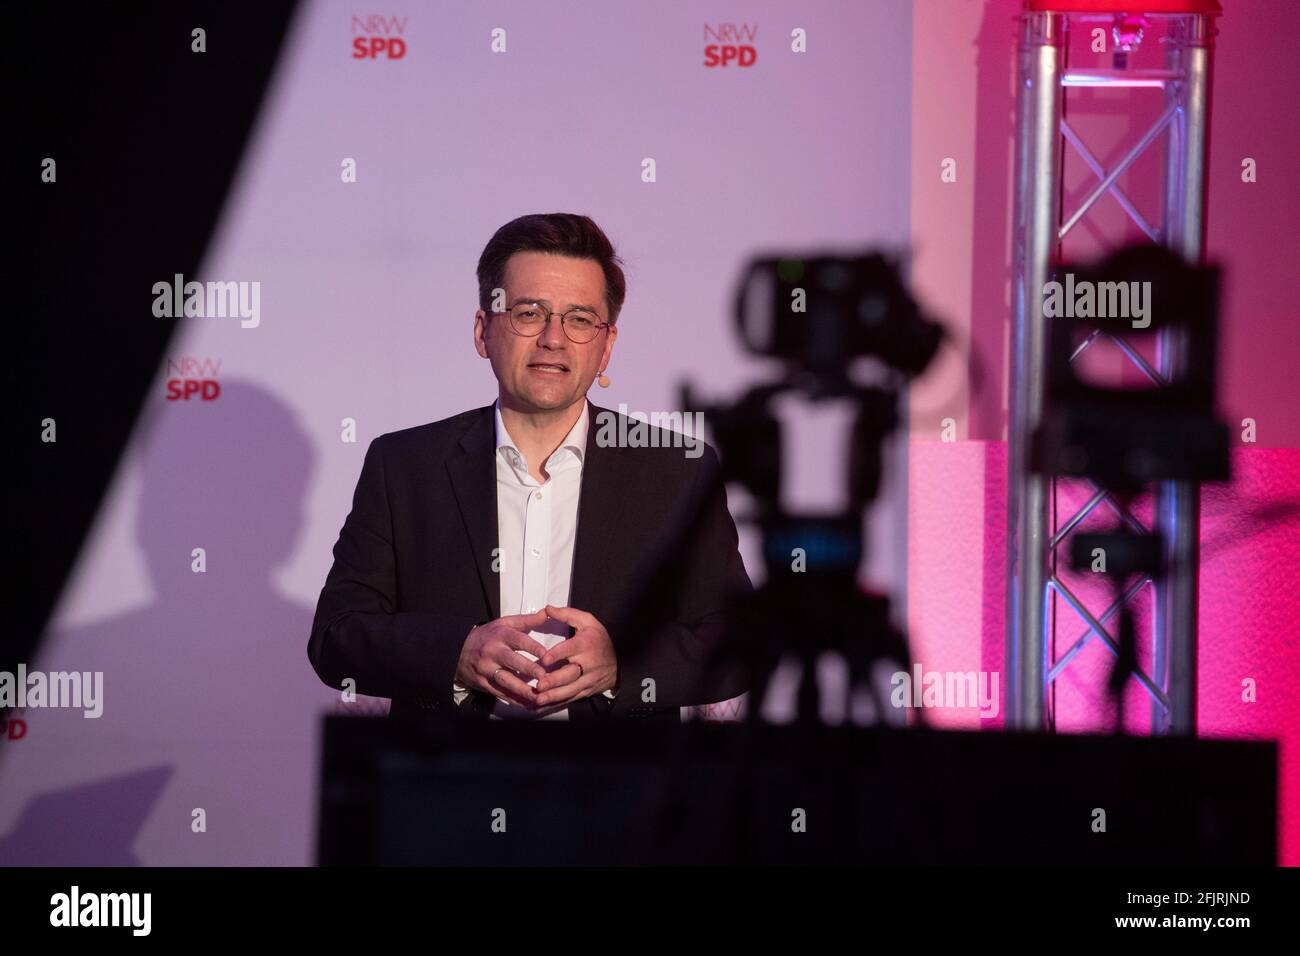 Duisburg, Deutschland. 24th Apr, 2021. Thomas Kutschaty, state chairman of the NRWSPD, SPD North Rhine-Westphalia, at his greeting, speech, state delegate conference of the NRWSPD for the federal election, NRWSPD, in the Steinhof in Duisburg, 04/24/2021, | usage worldwide Credit: dpa/Alamy Live News Stock Photo